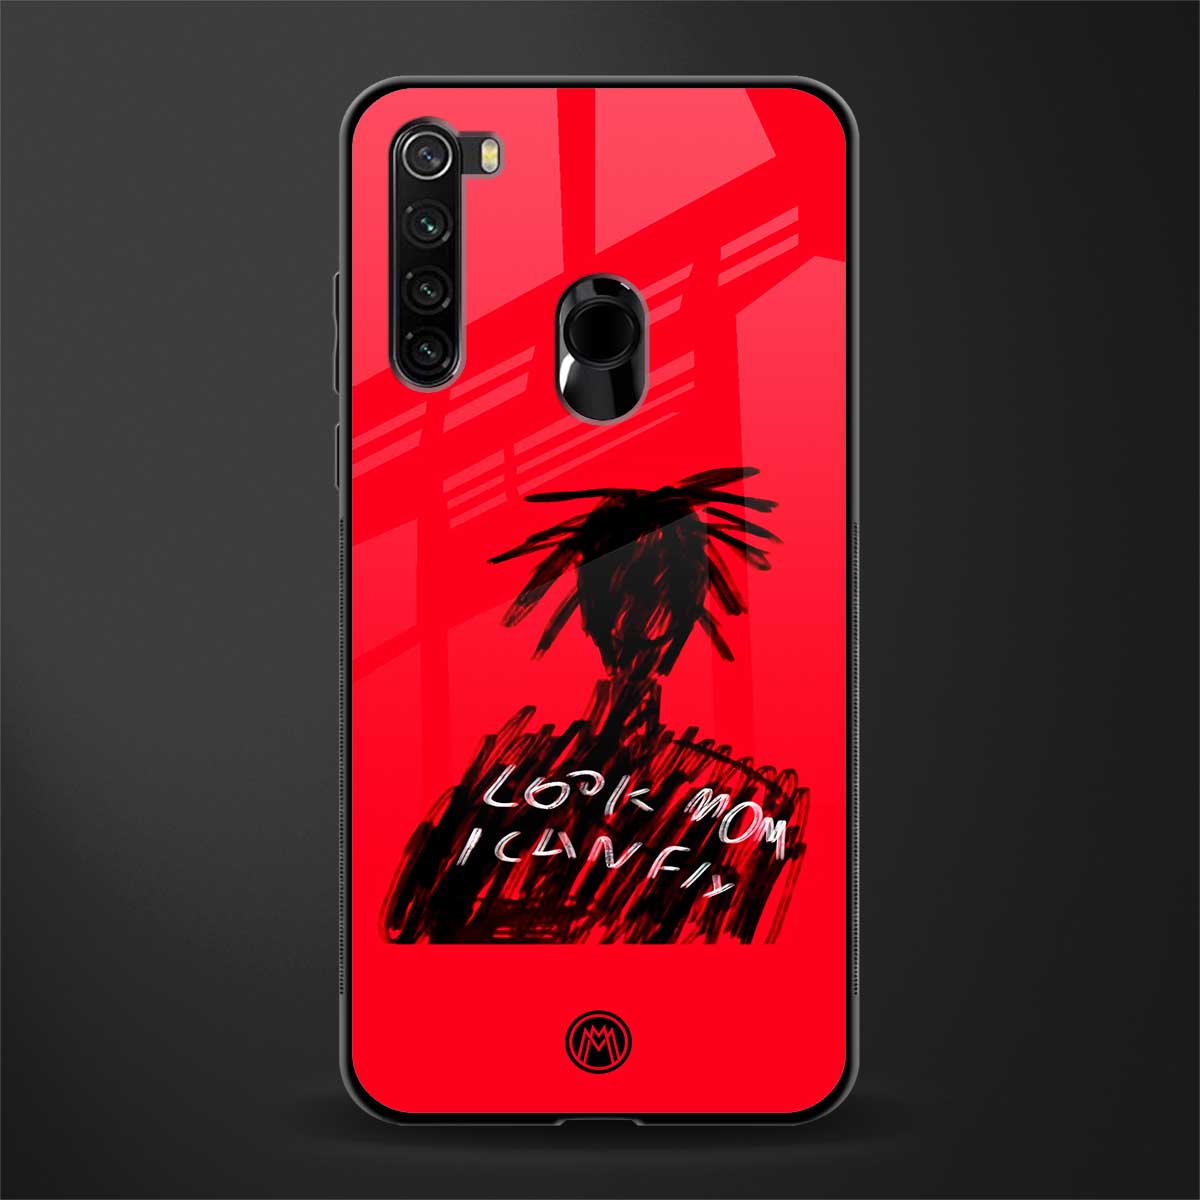 look mom i can fly glass case for redmi note 8 image